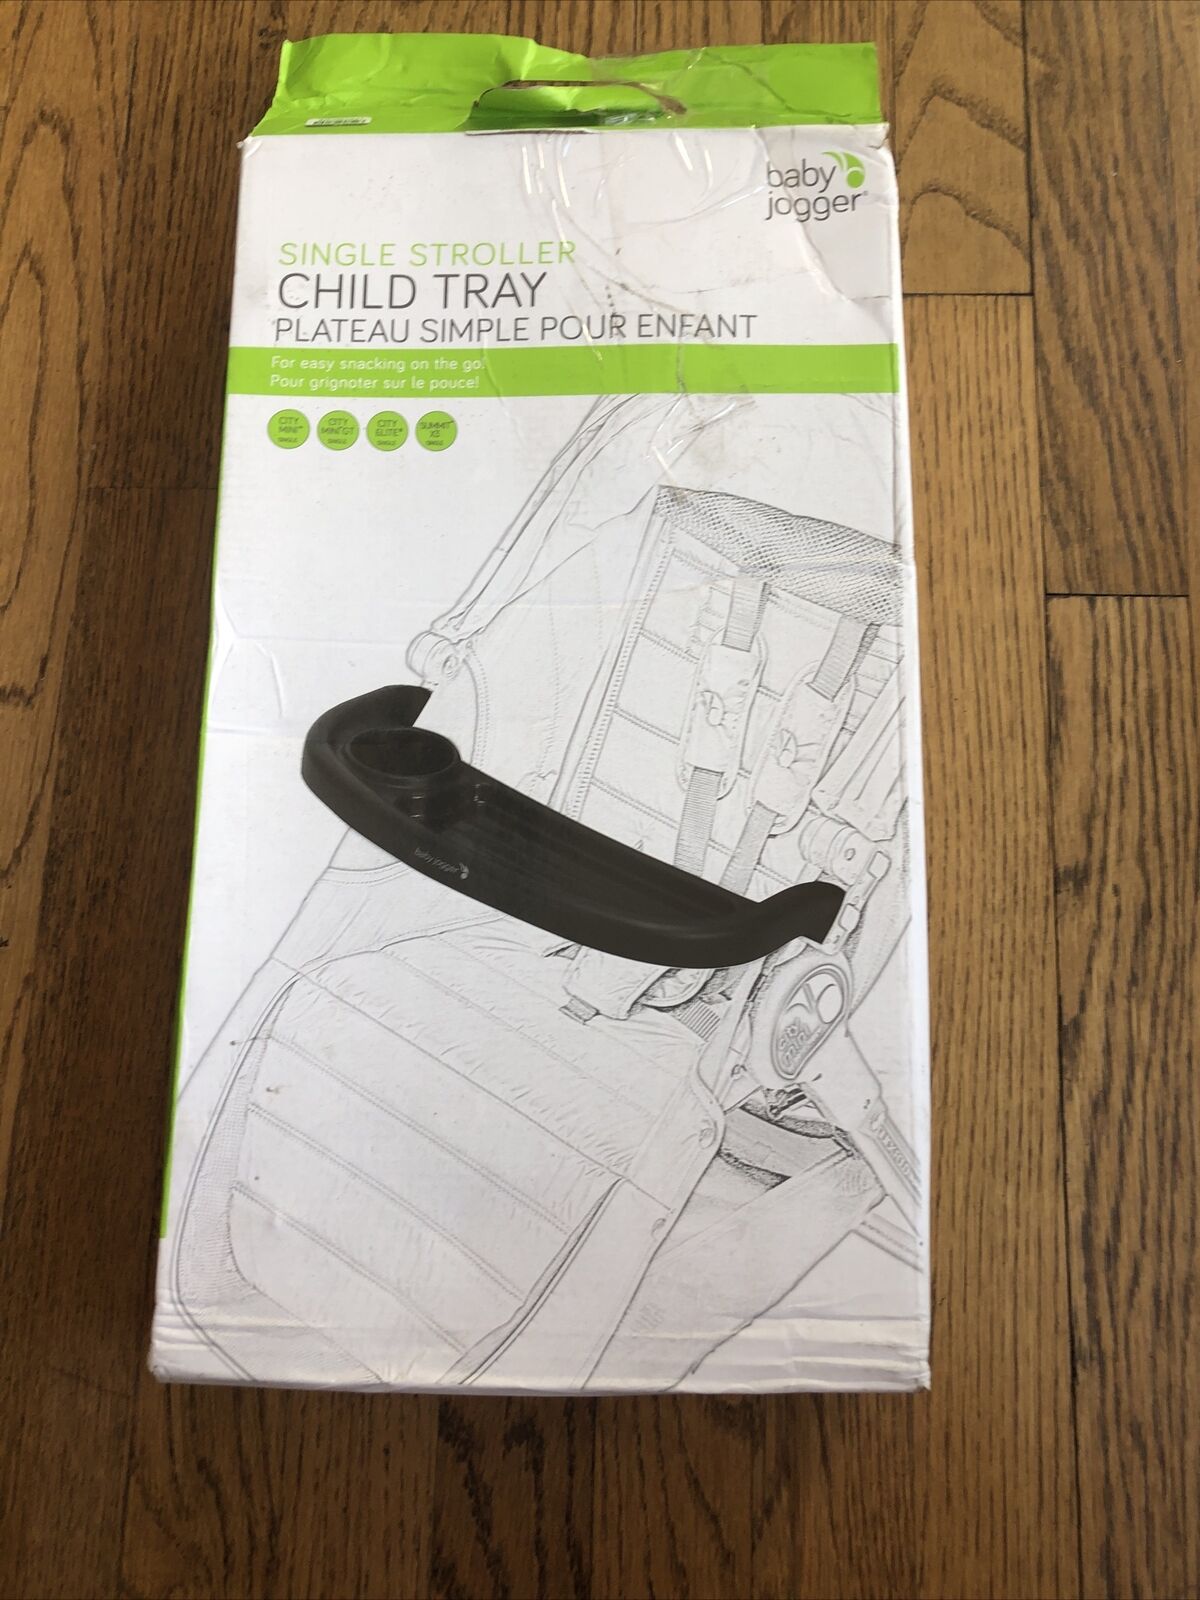 New! Baby Jogger Single Stroller Child Tray Cup Holder Black, Some Box Damage